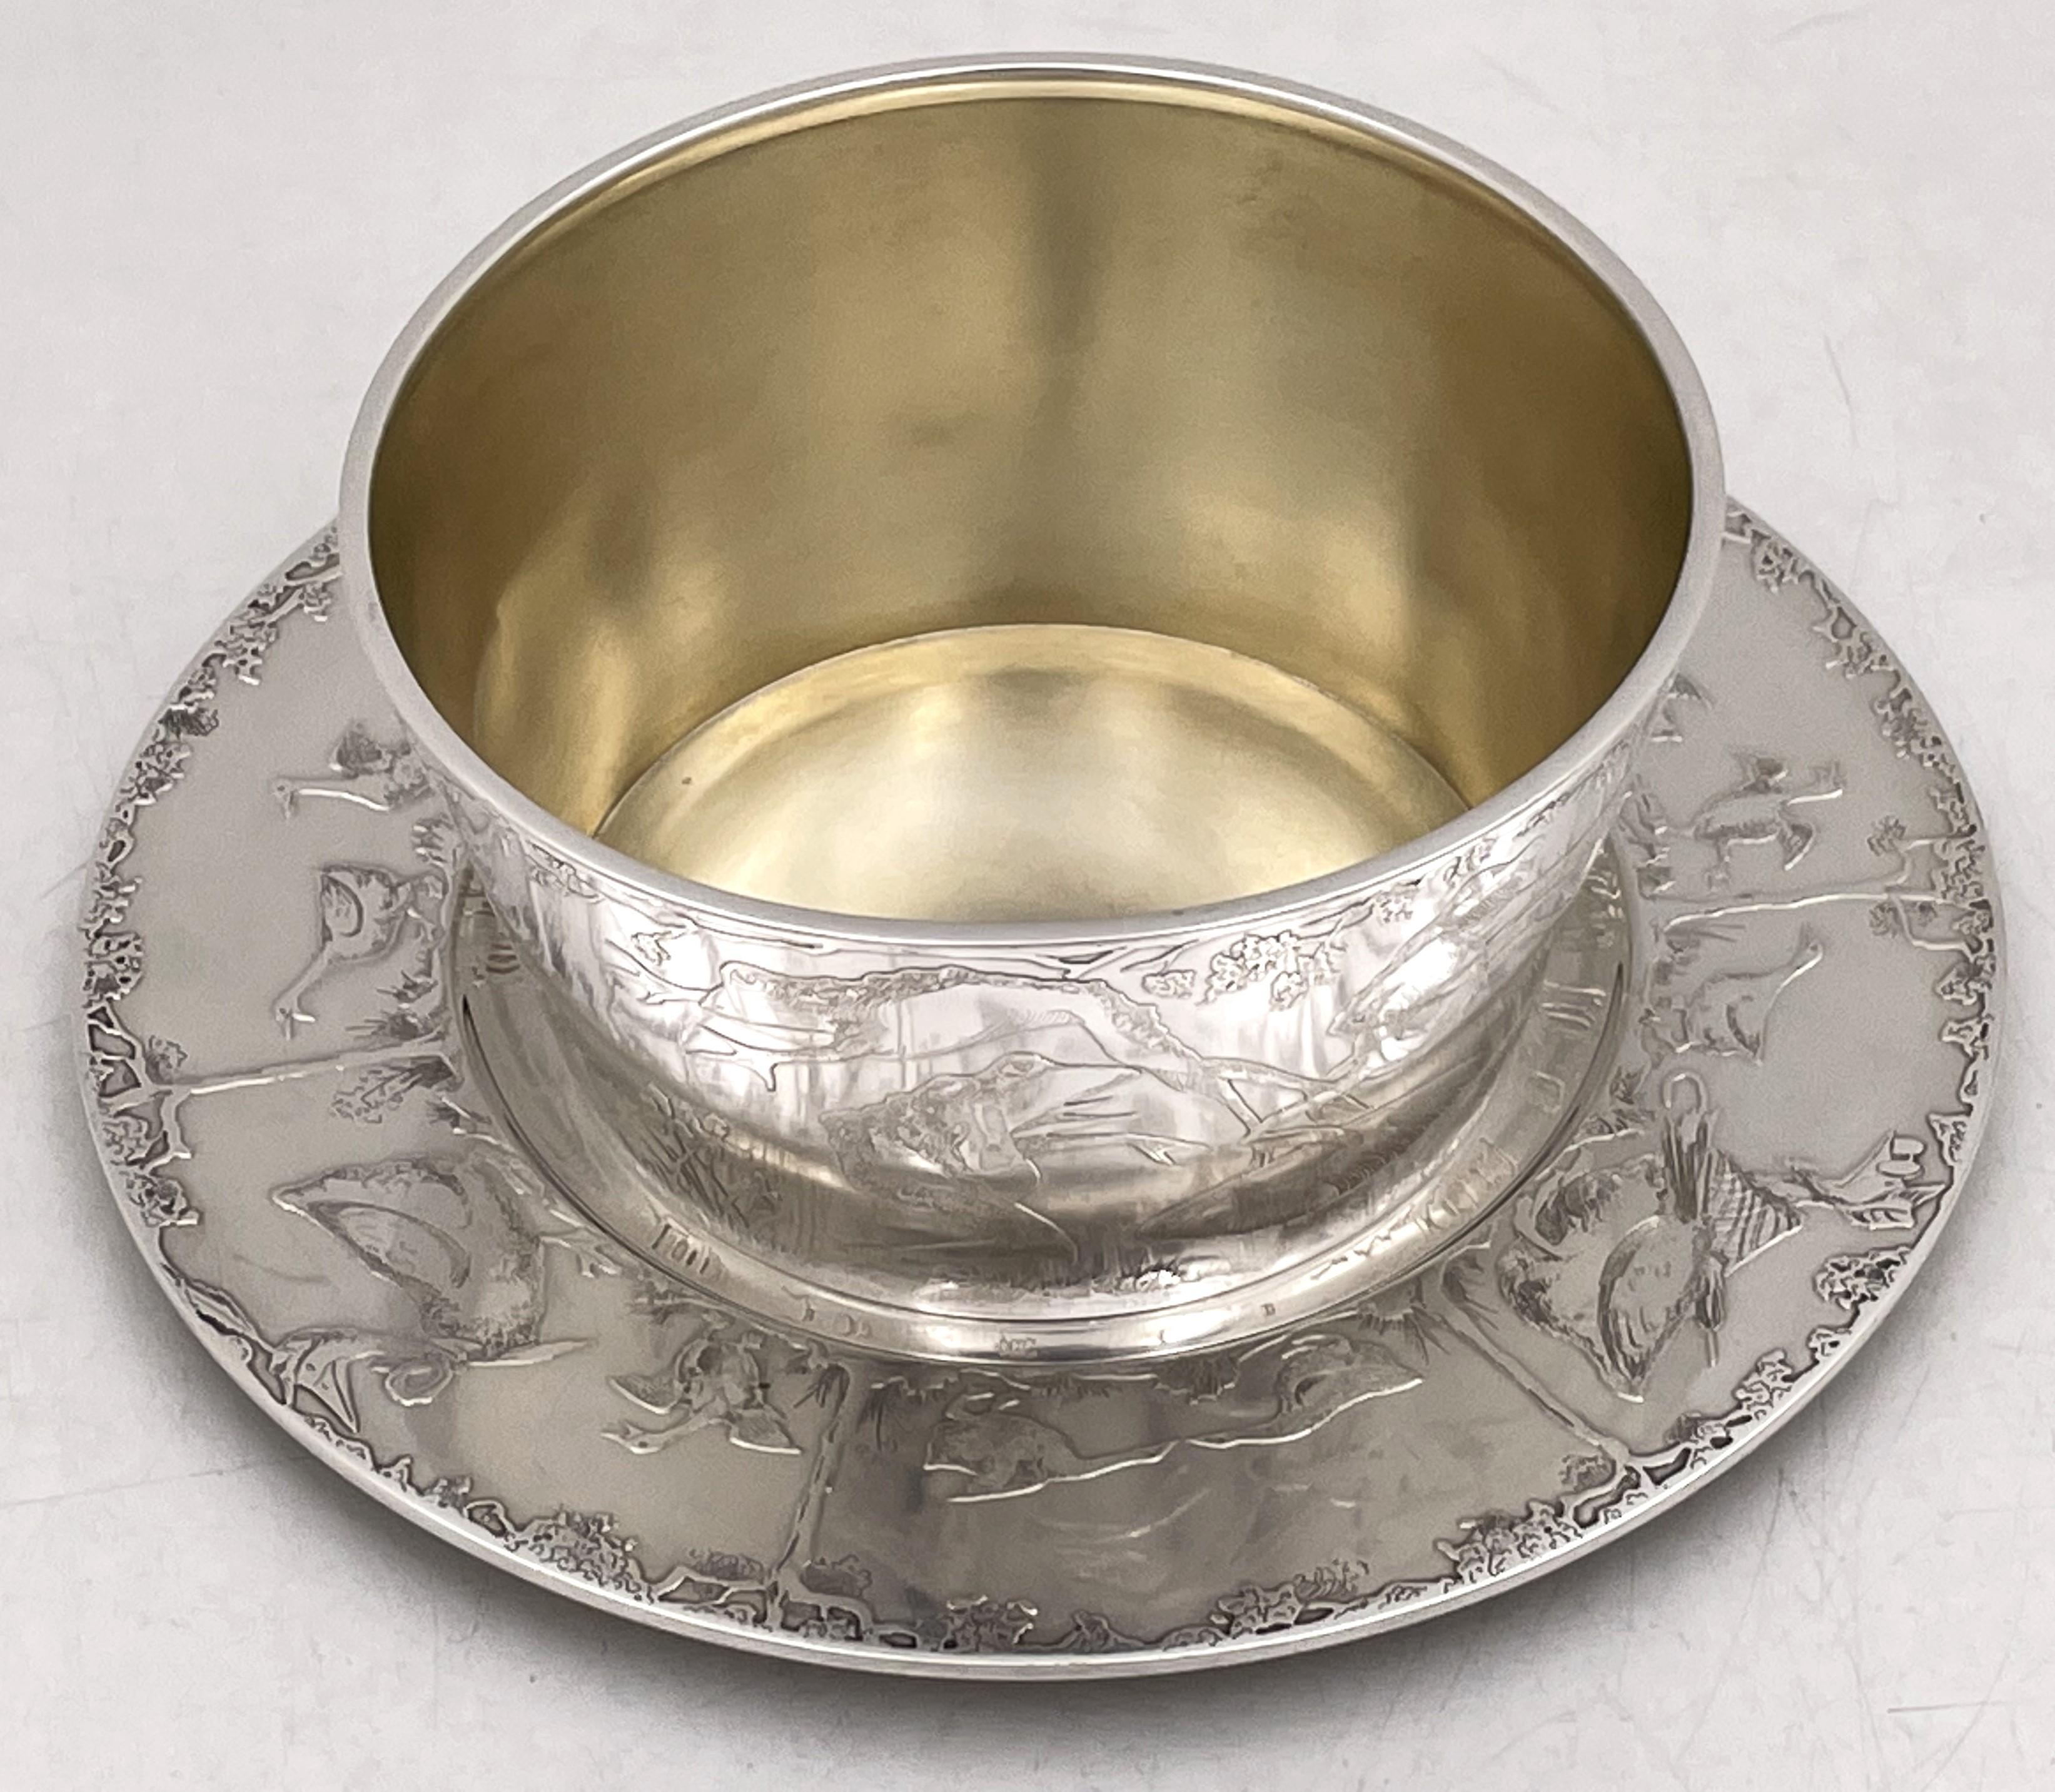 Frank W. Smith sterling silver bowl (gilt inside) and underplate, beautifully embossed with natural and animal motifs, including frogs, geese, and birds. The bowl measures 4 1/2'' in diameter by 2 1/3'' in height while the underplate measures 6